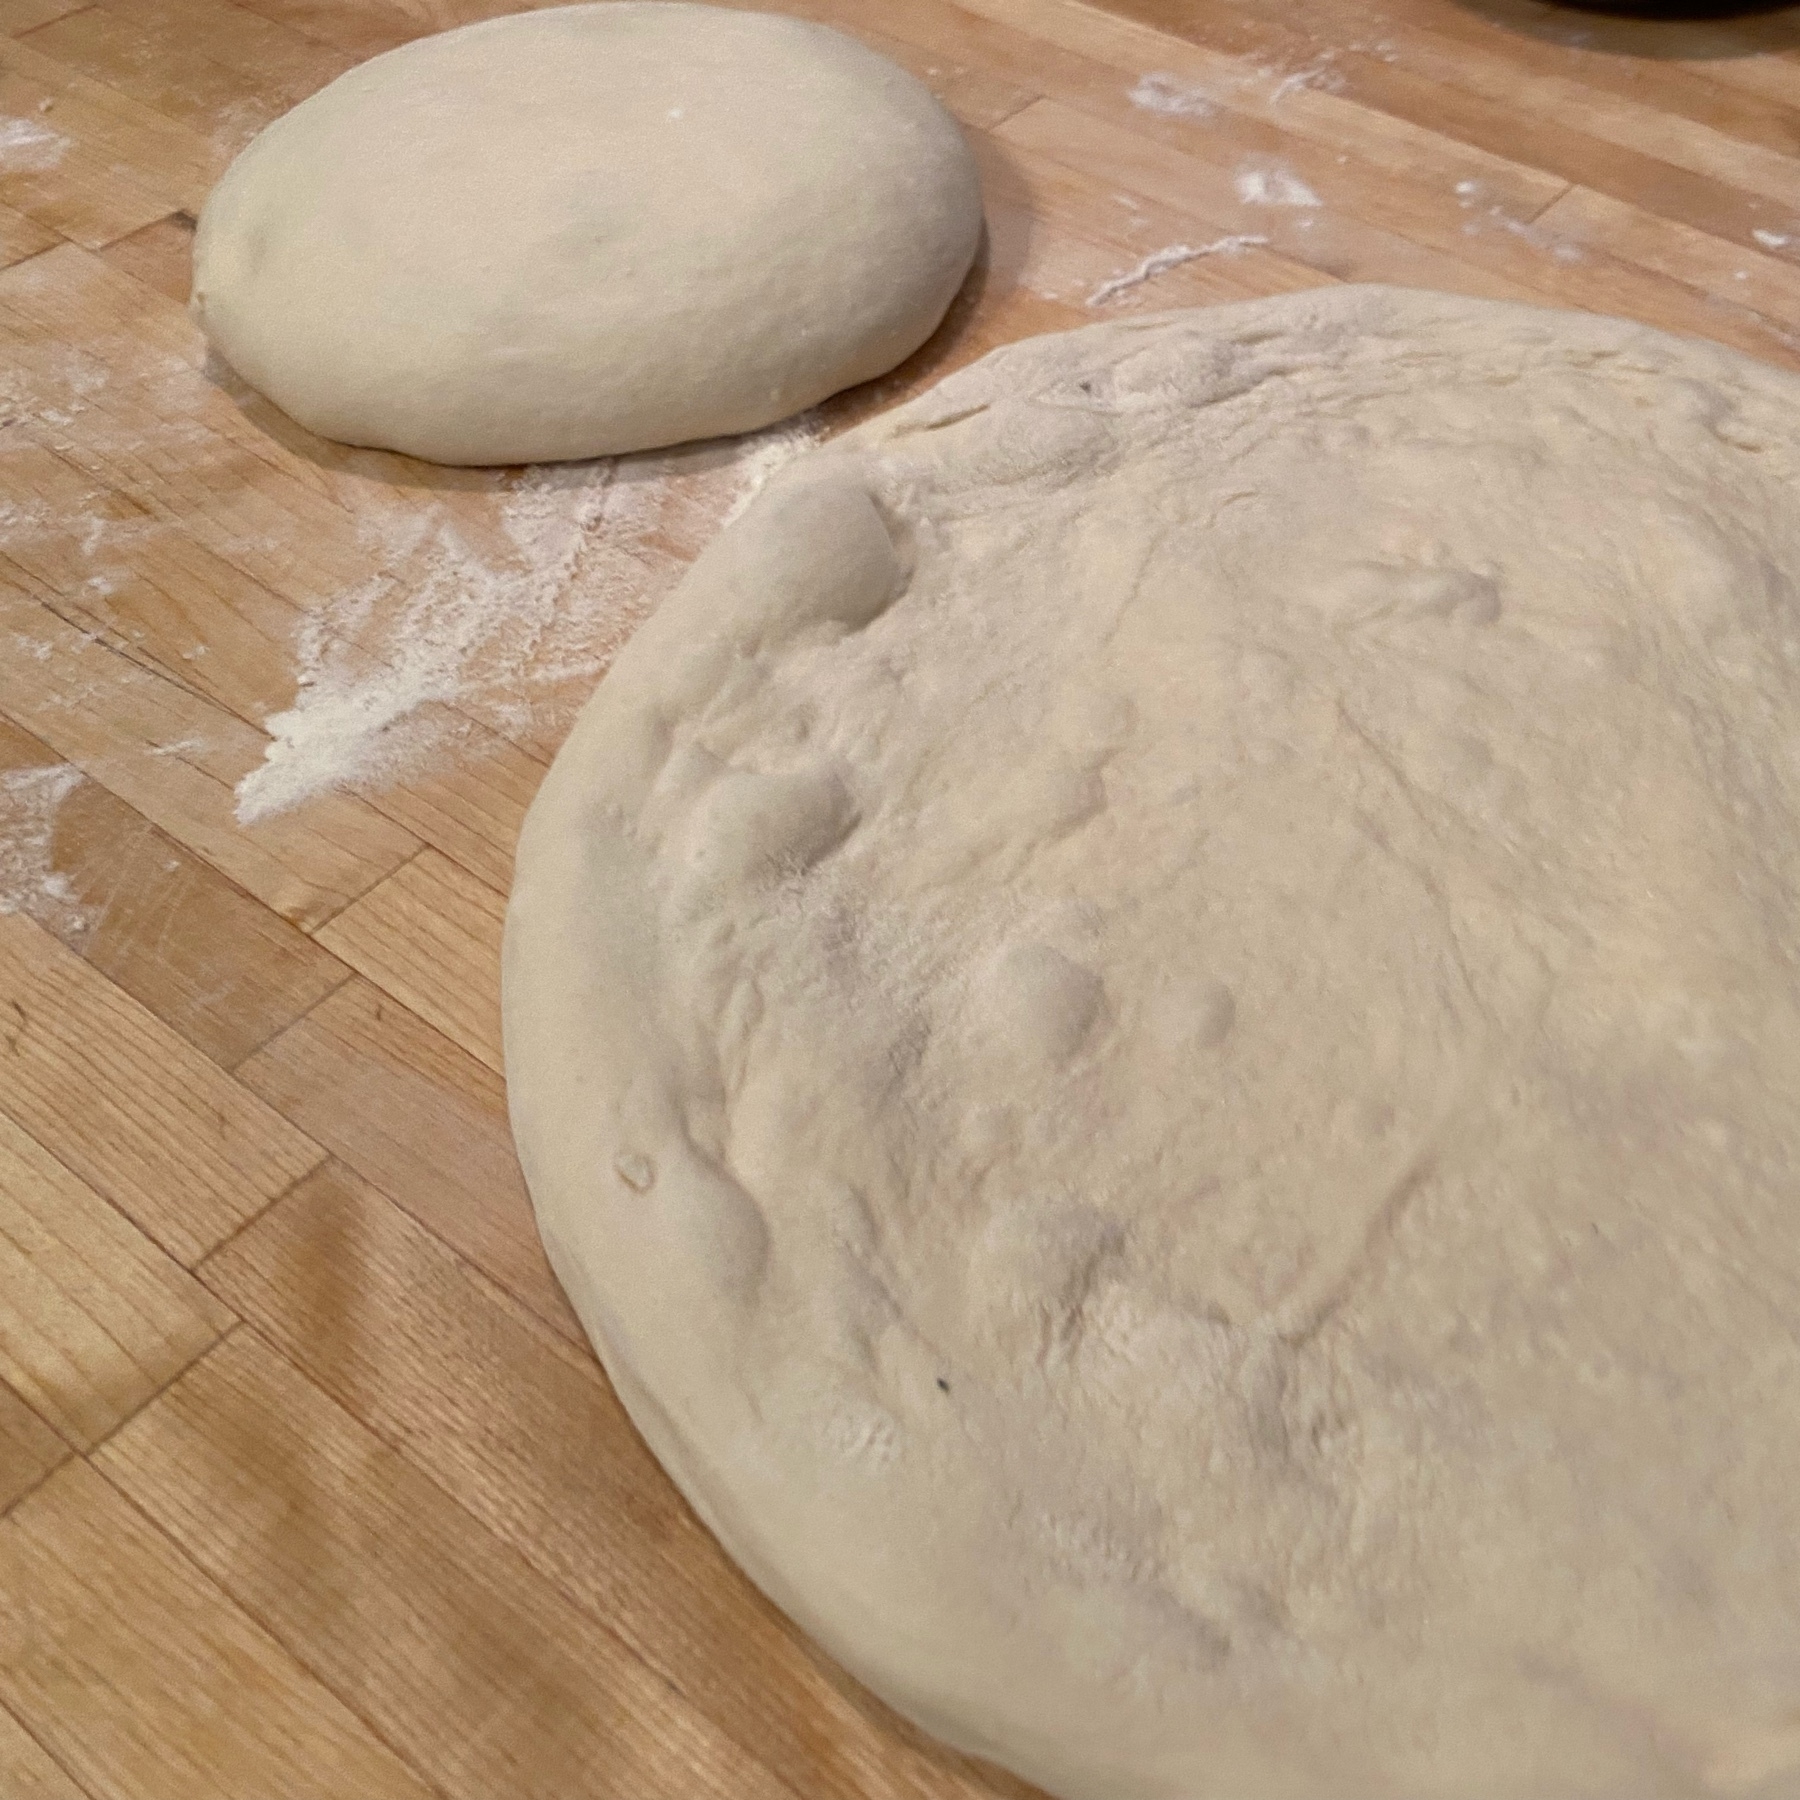 two dough balls, one stretched into a pizza shape and one in a round mound